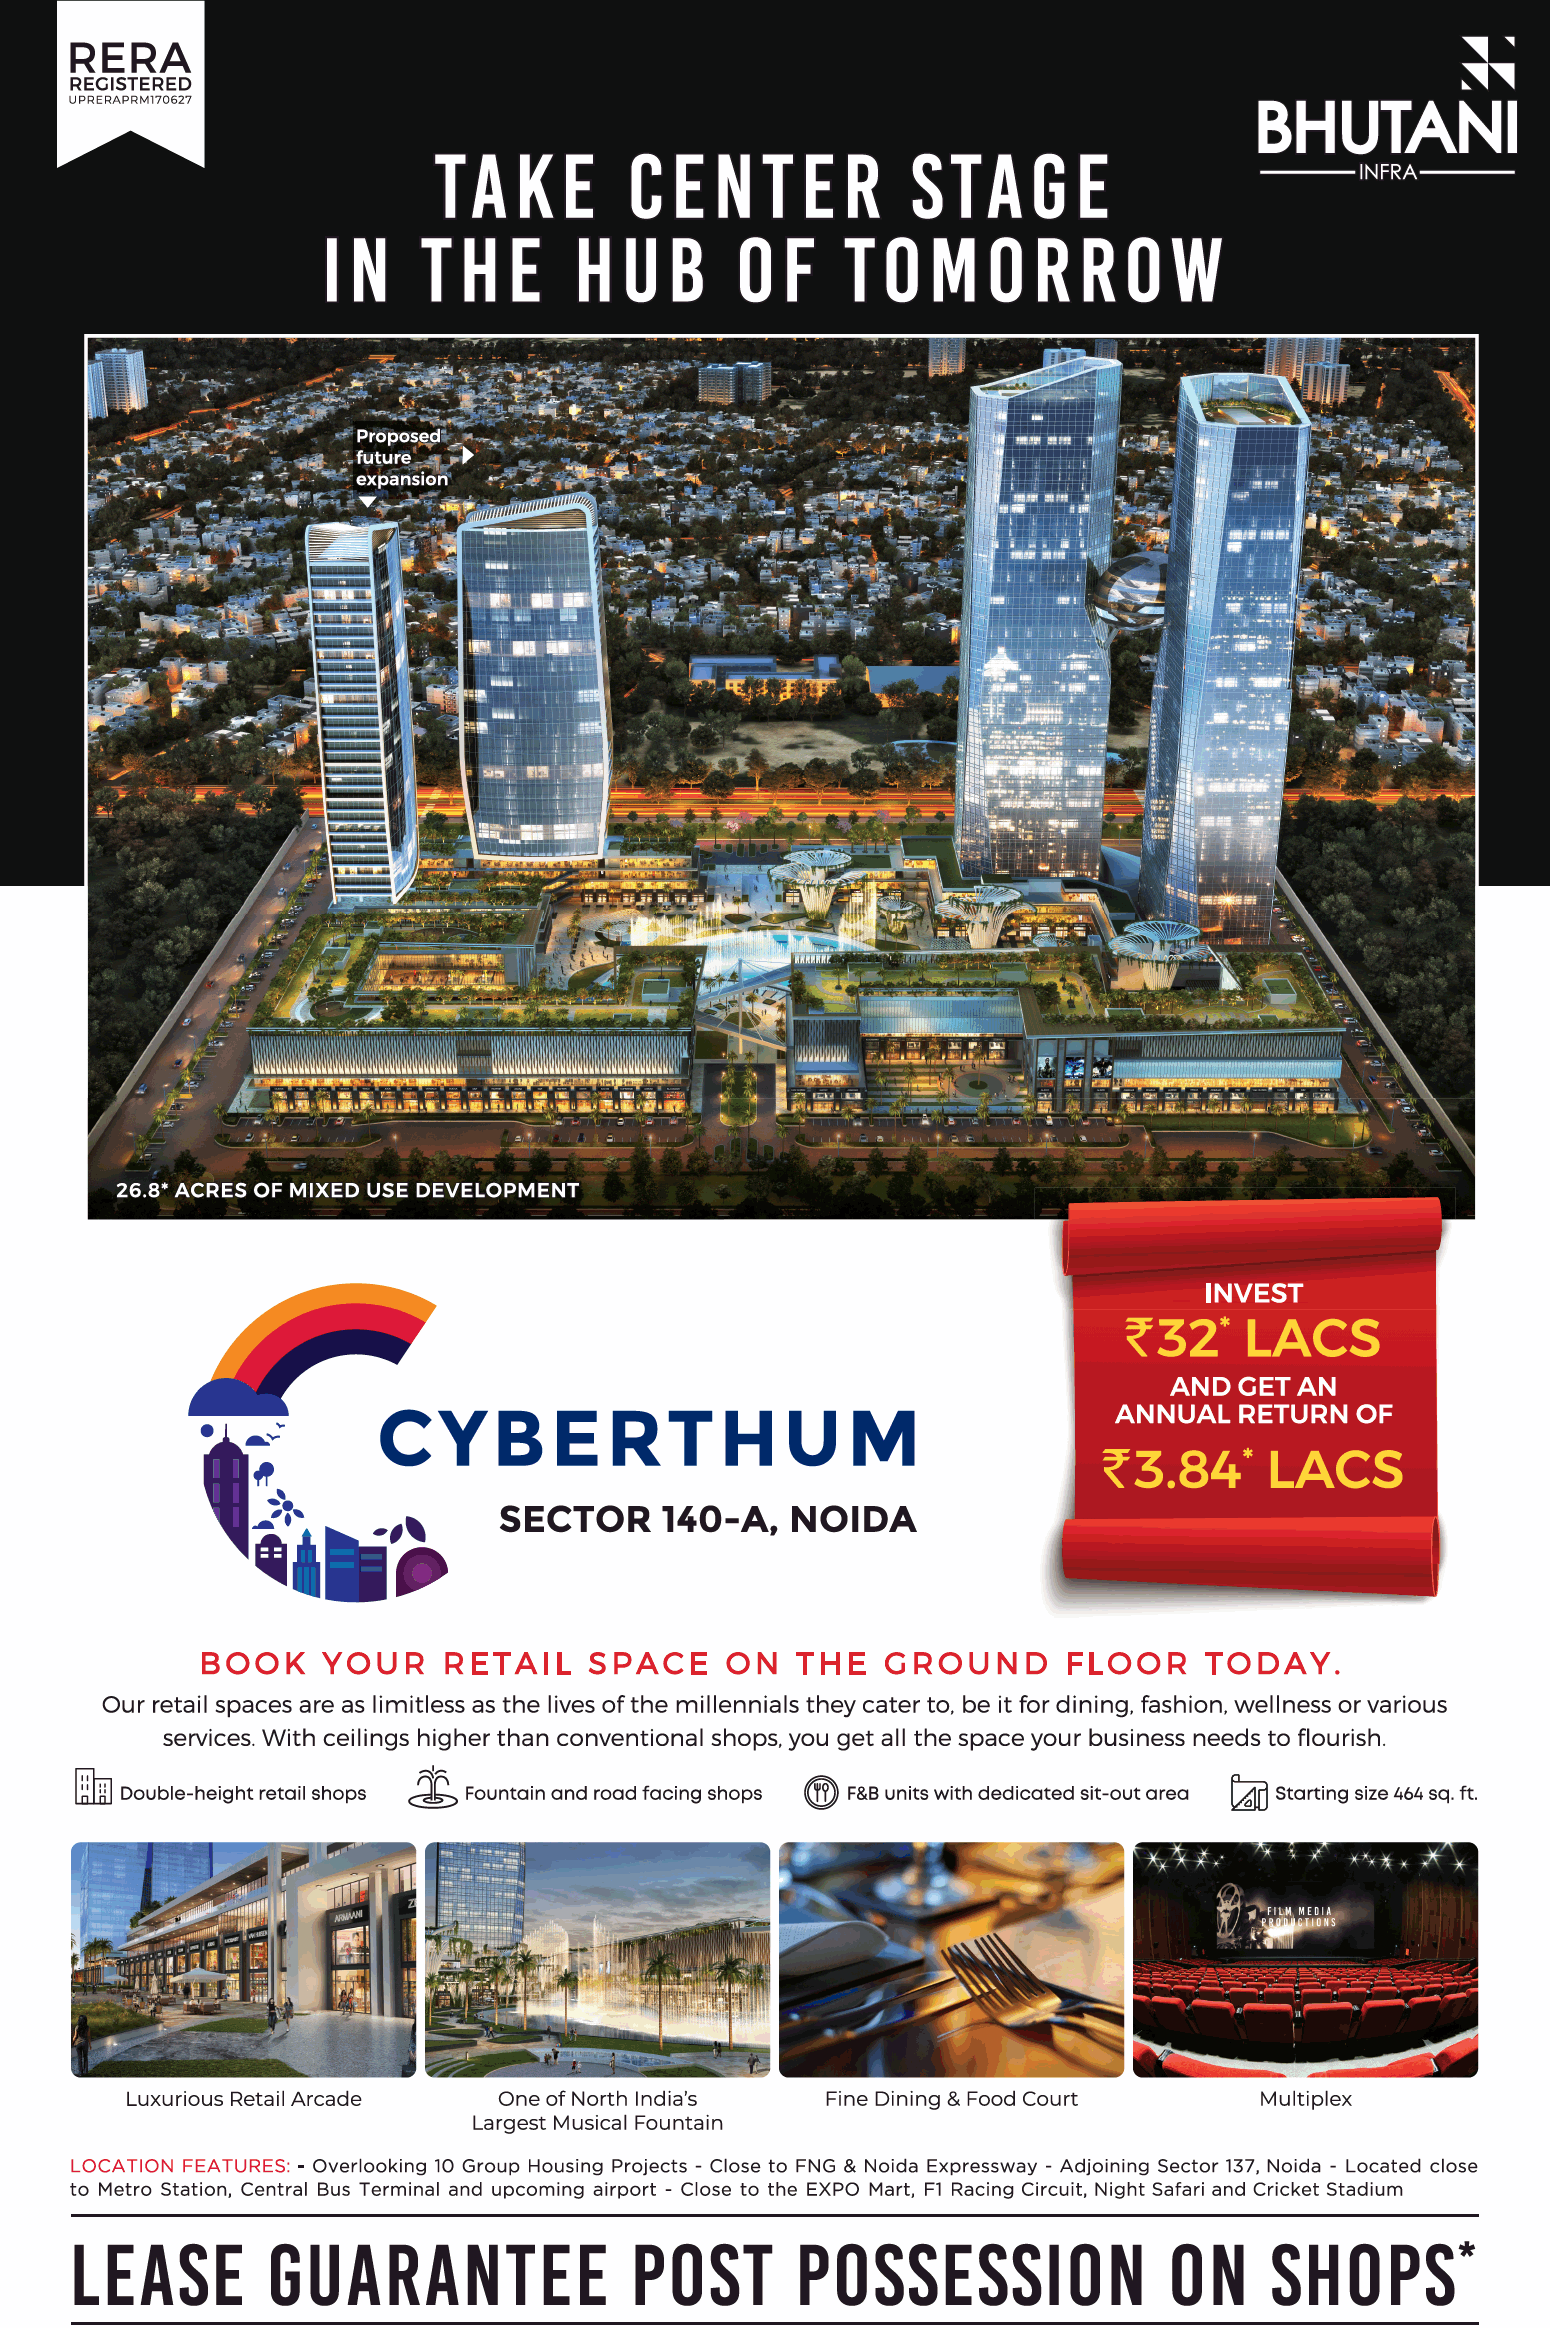 Book your retail space on the ground floor at Bhutani Cyberthum, Noida Update